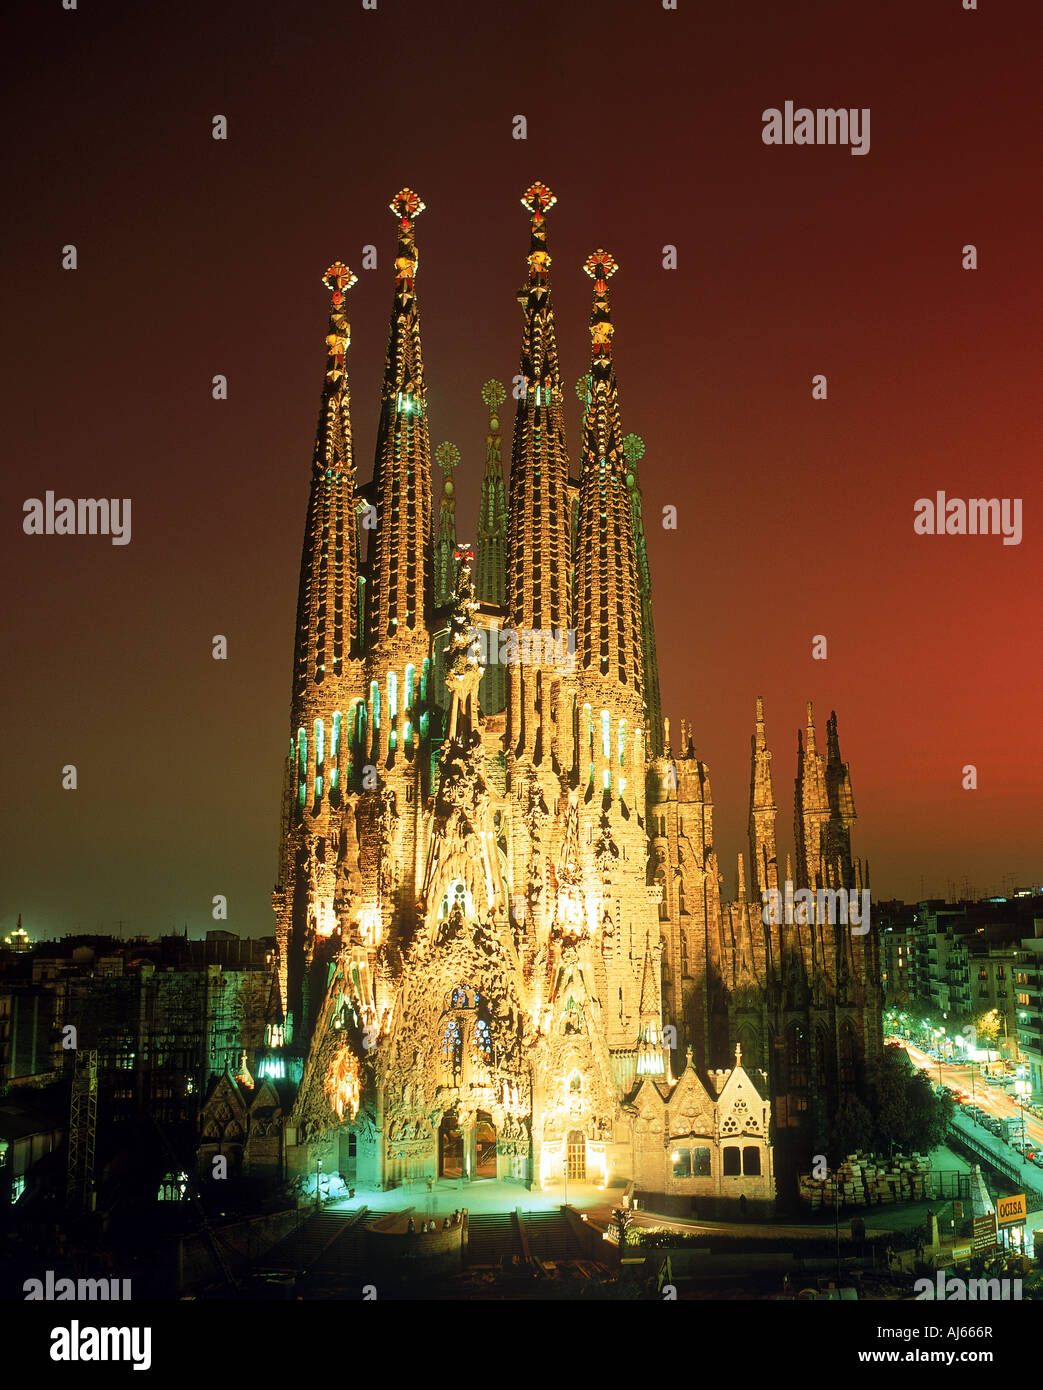 Church Holy Family Barcelona High Resolution Stock Photography and ...